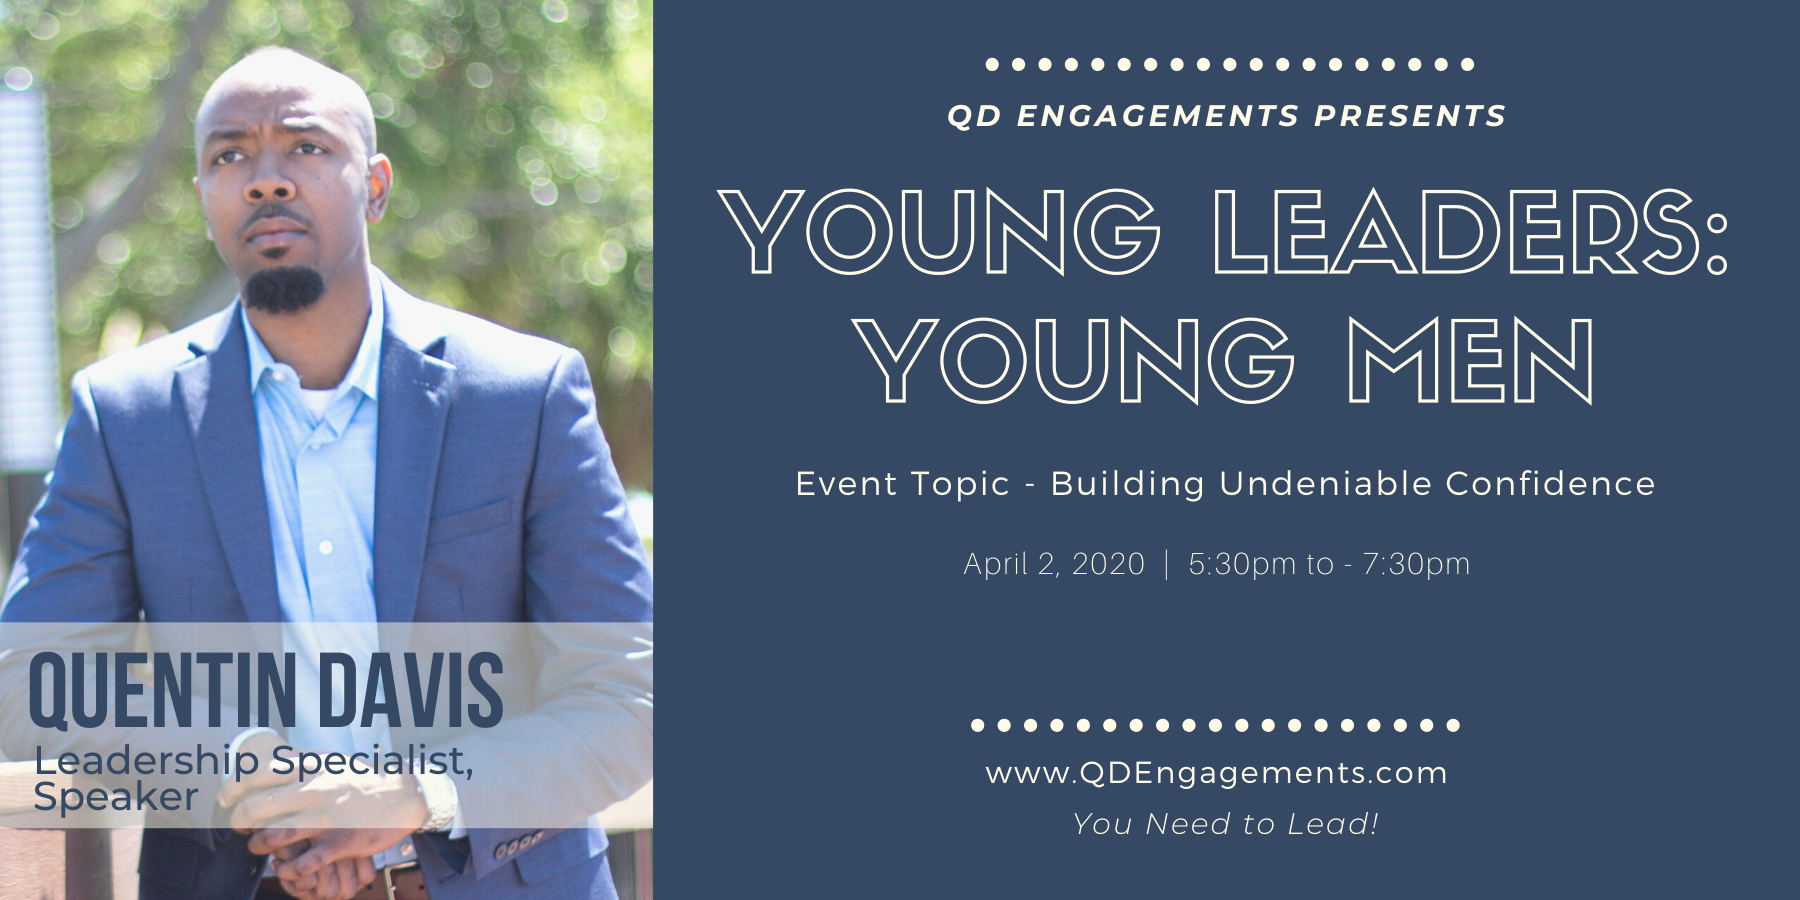 Young Leaders: Young Men - Building Undeniable Confidence